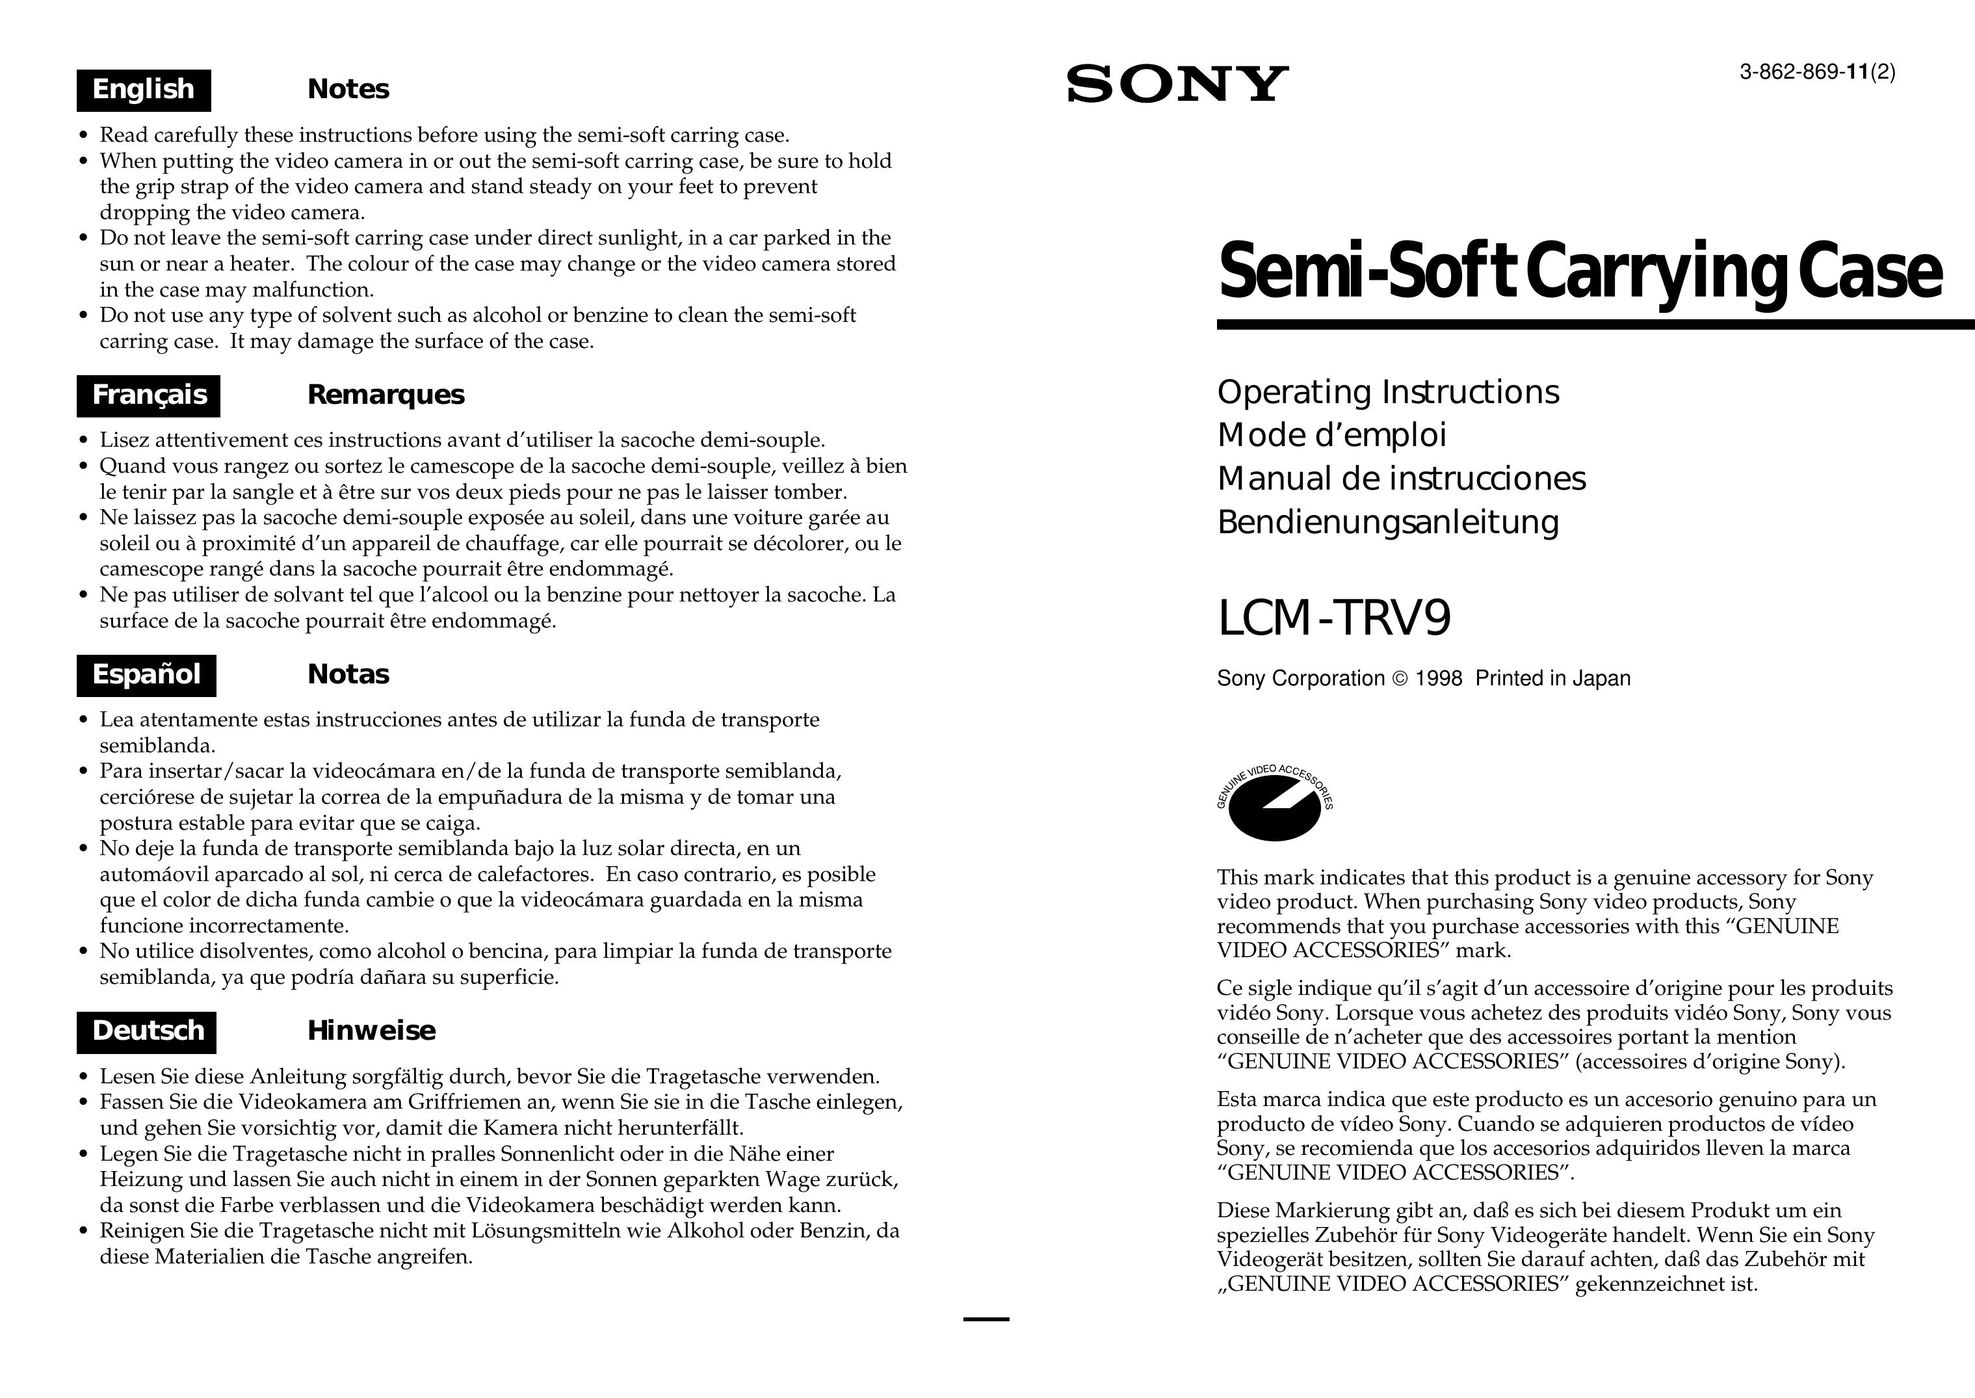 Sony LCM-TRV9 Carrying Case User Manual